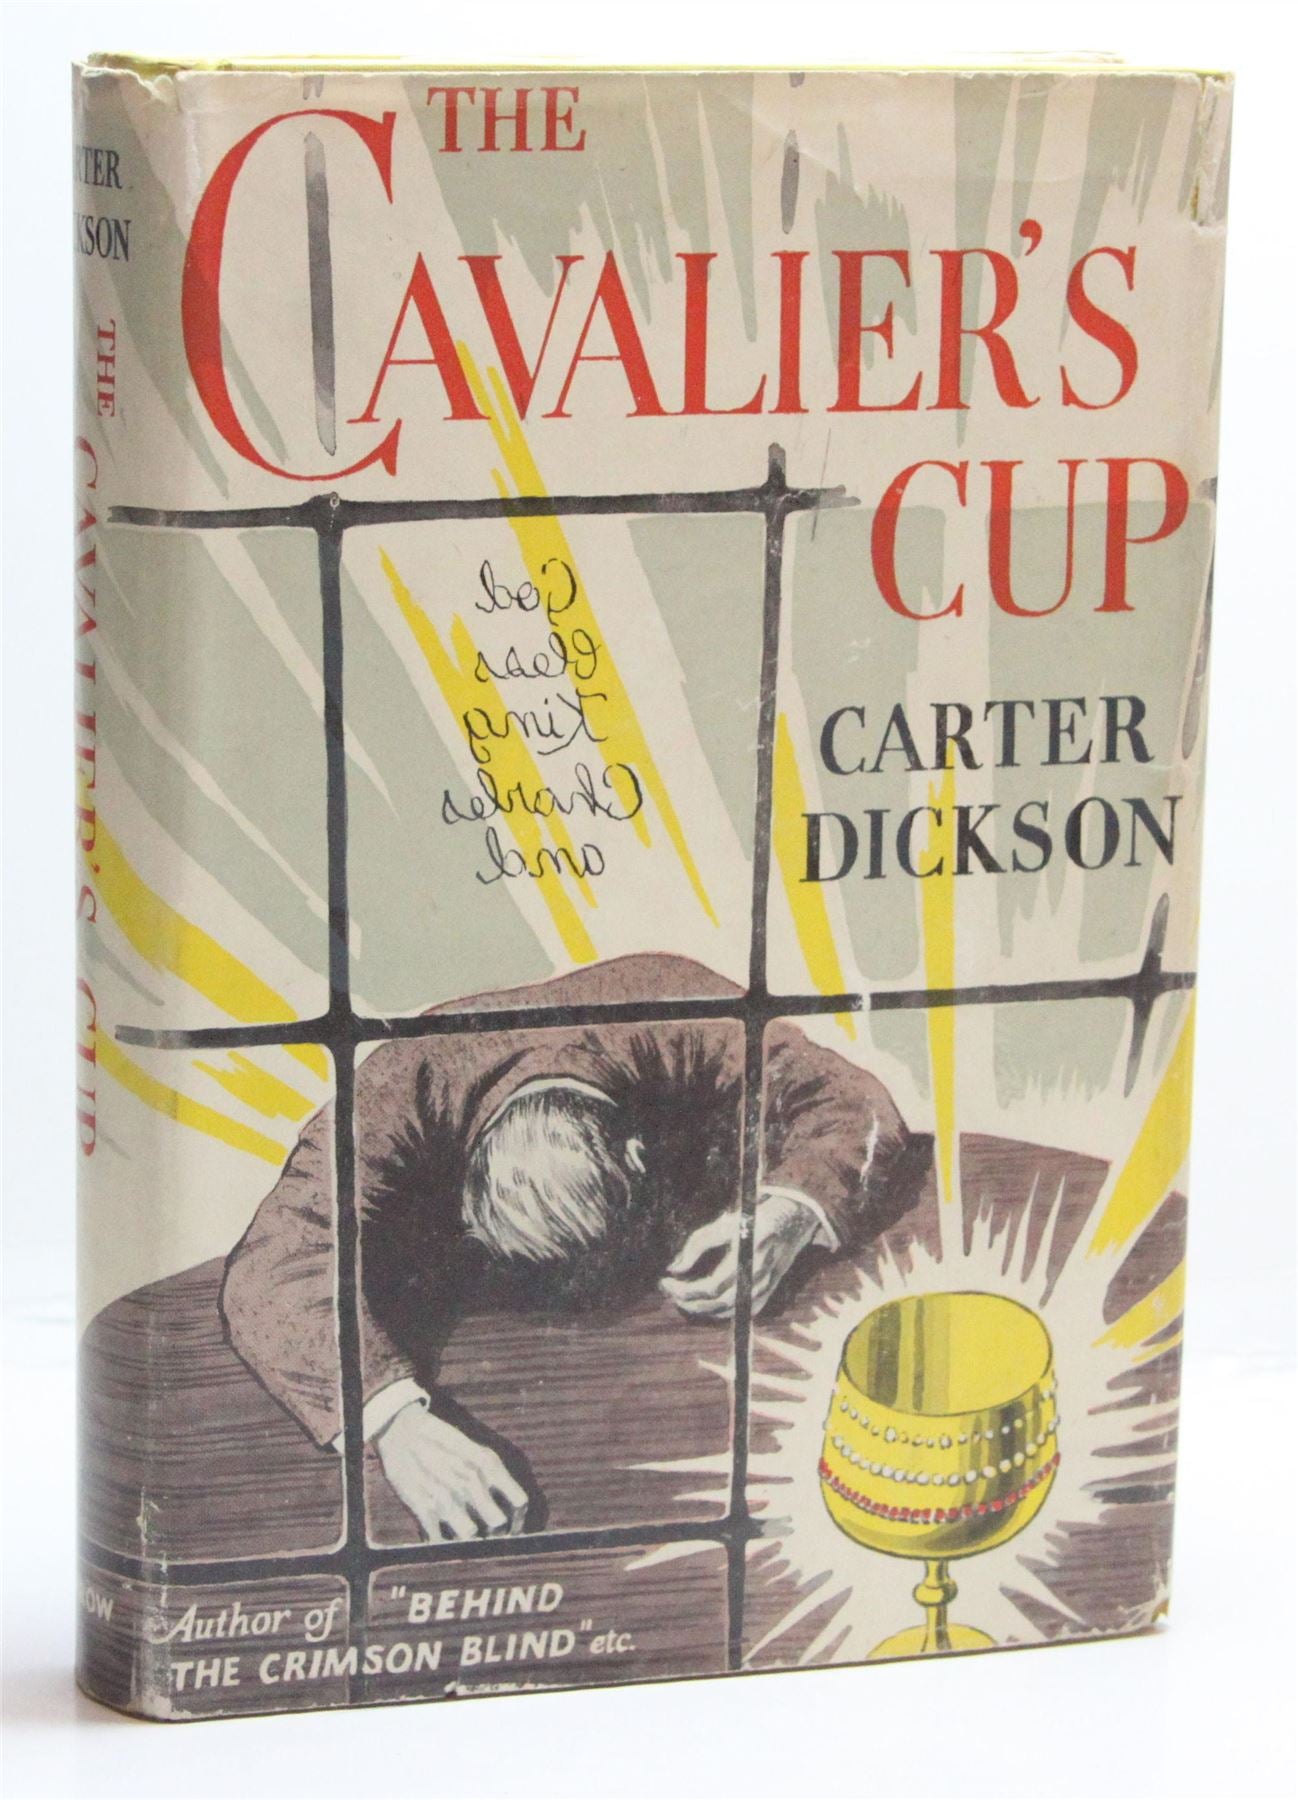 The Cavalier's Cup (US Edition)